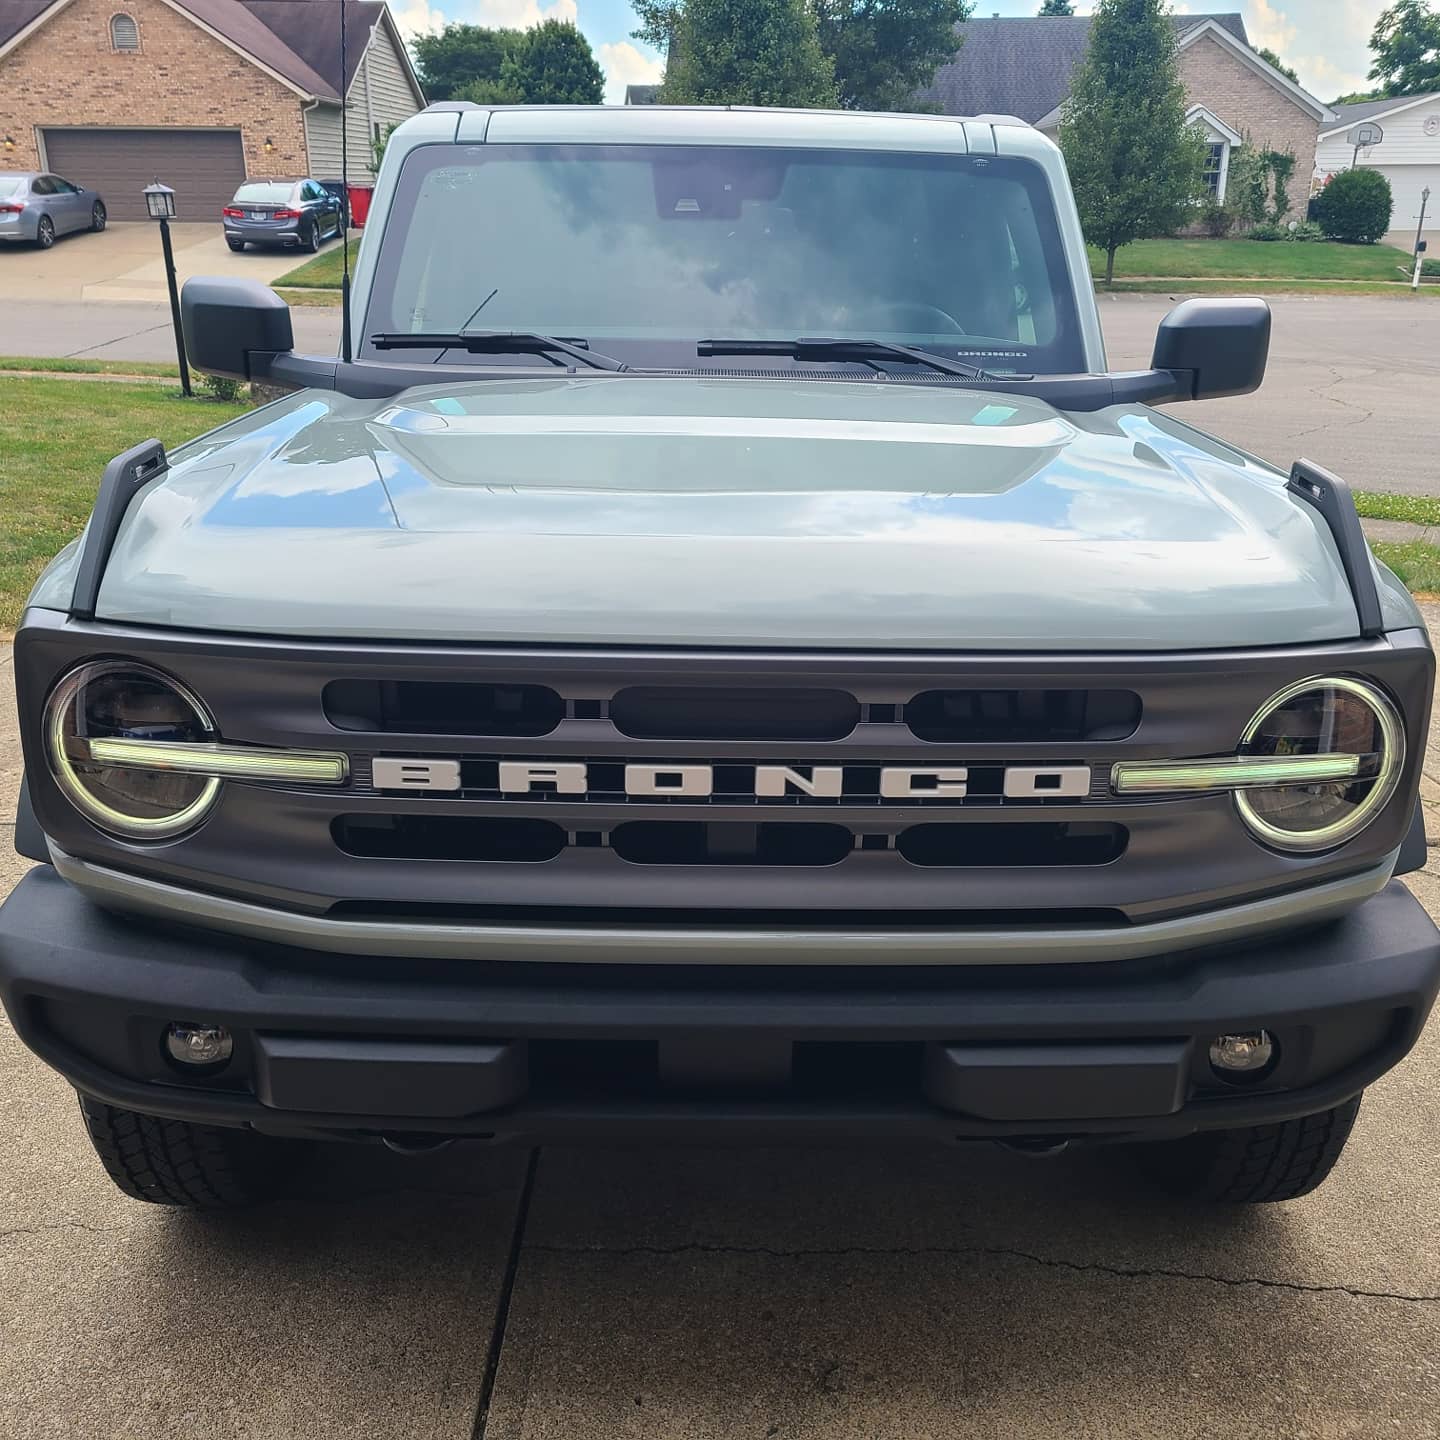 Ford Bronco My Cactus Gray Big Bend just delivered. First pics & early impressions img_20210629_173501_366-